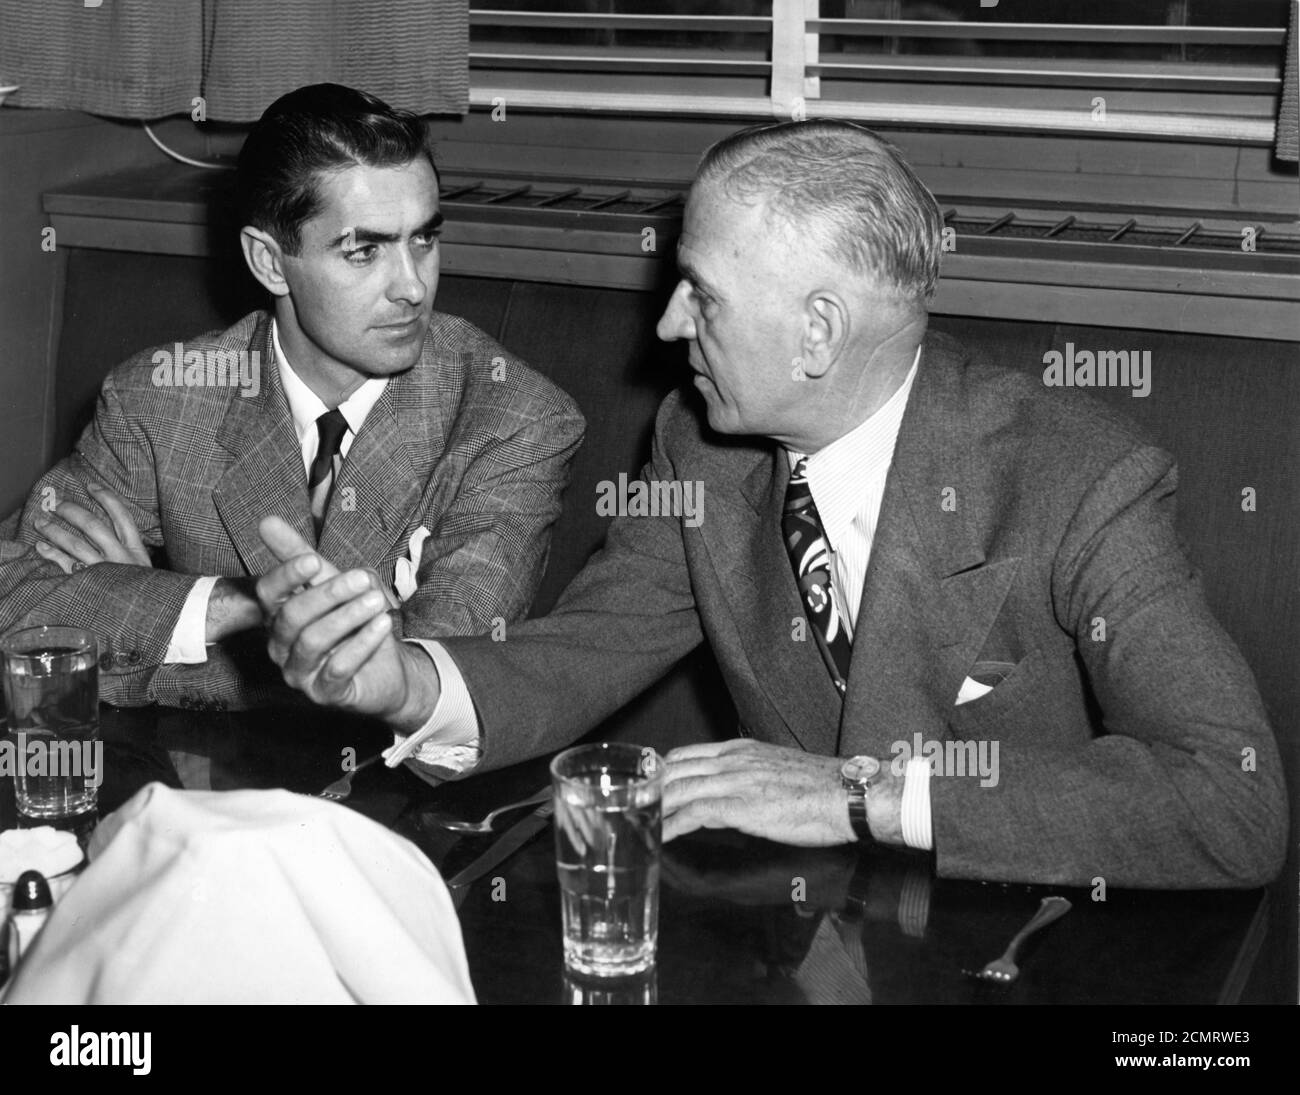 TYRONE POWER with the originally scheduled director HENRY KING during pre-production of the film version of THE RAZOR'S EDGE 1946 director EDMUND GOULDING novel W. Somerset Maugham screenplay Lamar Trotti  music Alfred Newman producer Darryl F. Zanuck Twentieth Century Fox Stock Photo